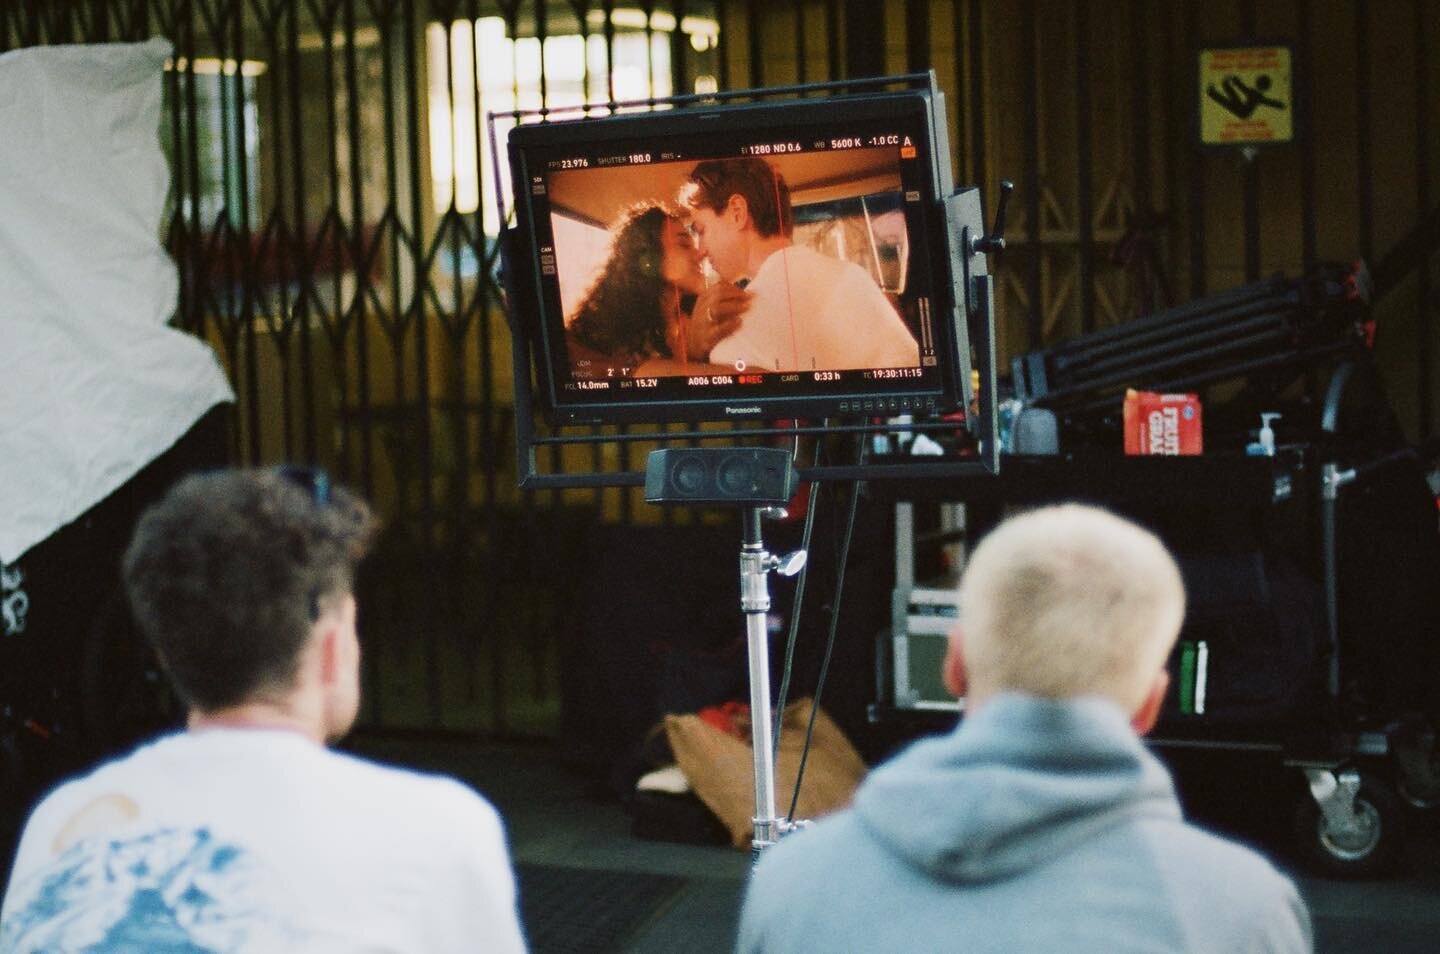 Three days in blistering June on the set of our @bumble spot. Link in bio to watch ☀️

Produced by @fieldunit
Stills by @daryana.fly 

We had an amazing crew on this one. Very grateful for all the TLC they put into each scene. And a huge shout out to